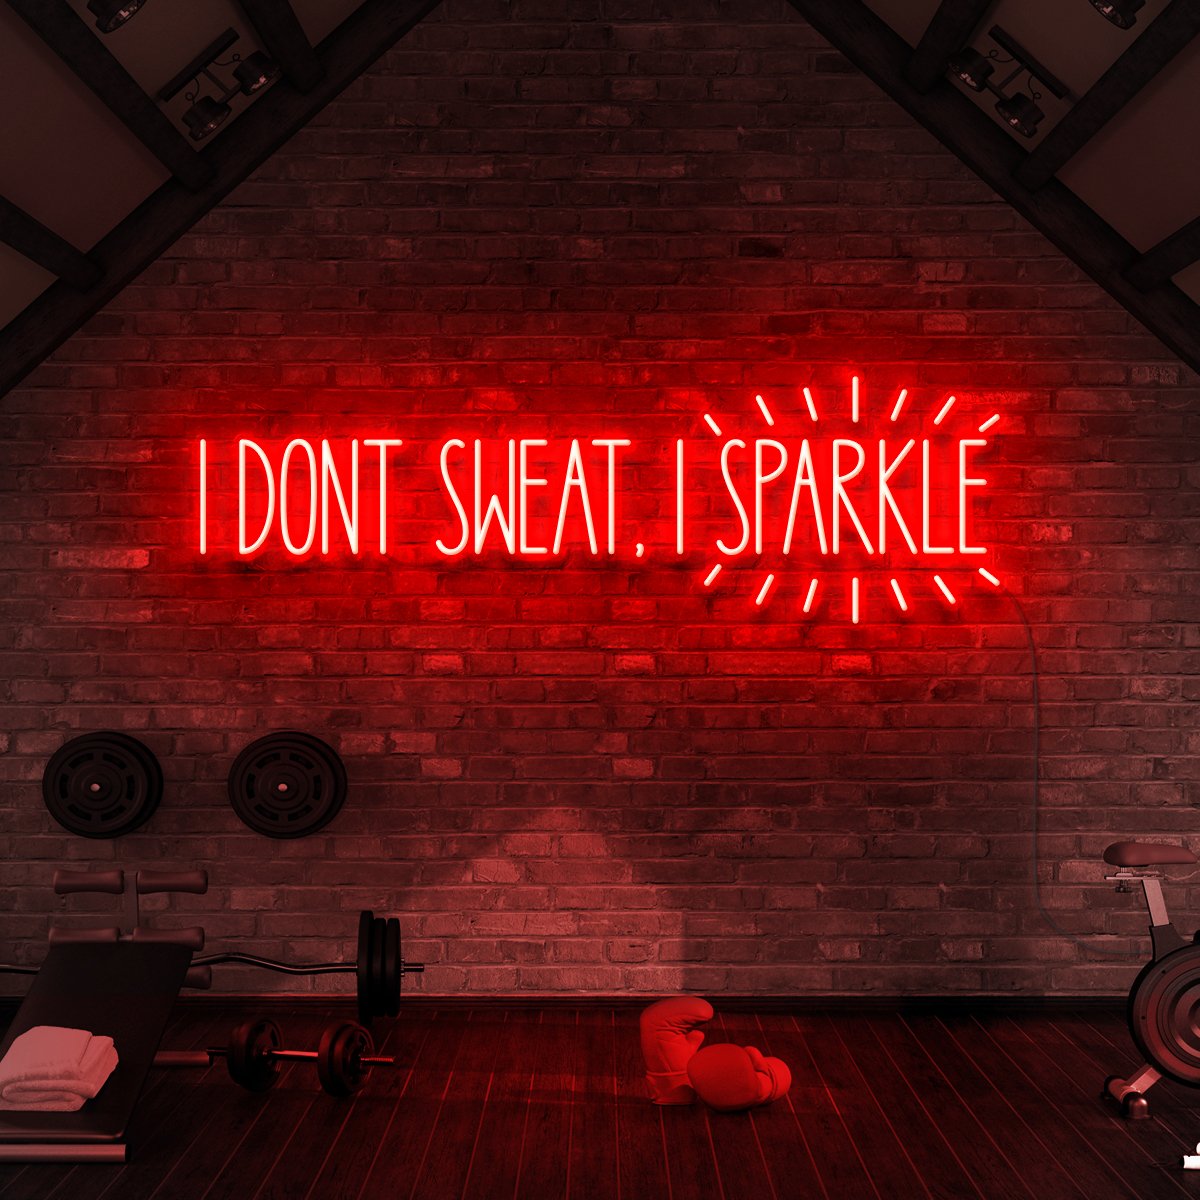 "I Don't Sweat, I Sparkle" Neon Sign for Gyms & Fitness Studios